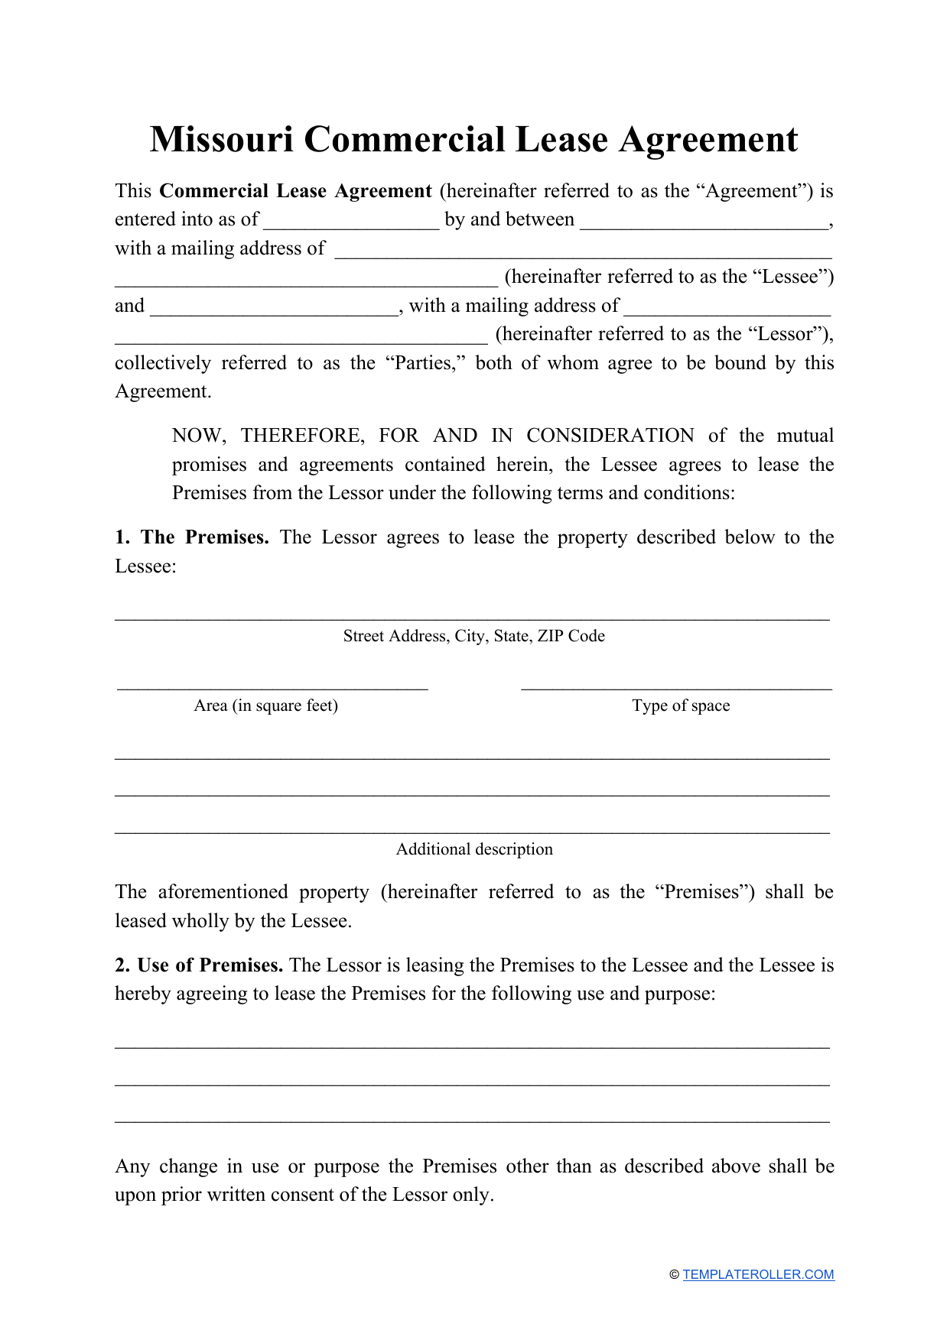 Missouri Commercial Lease Agreement Template Download Printable PDF